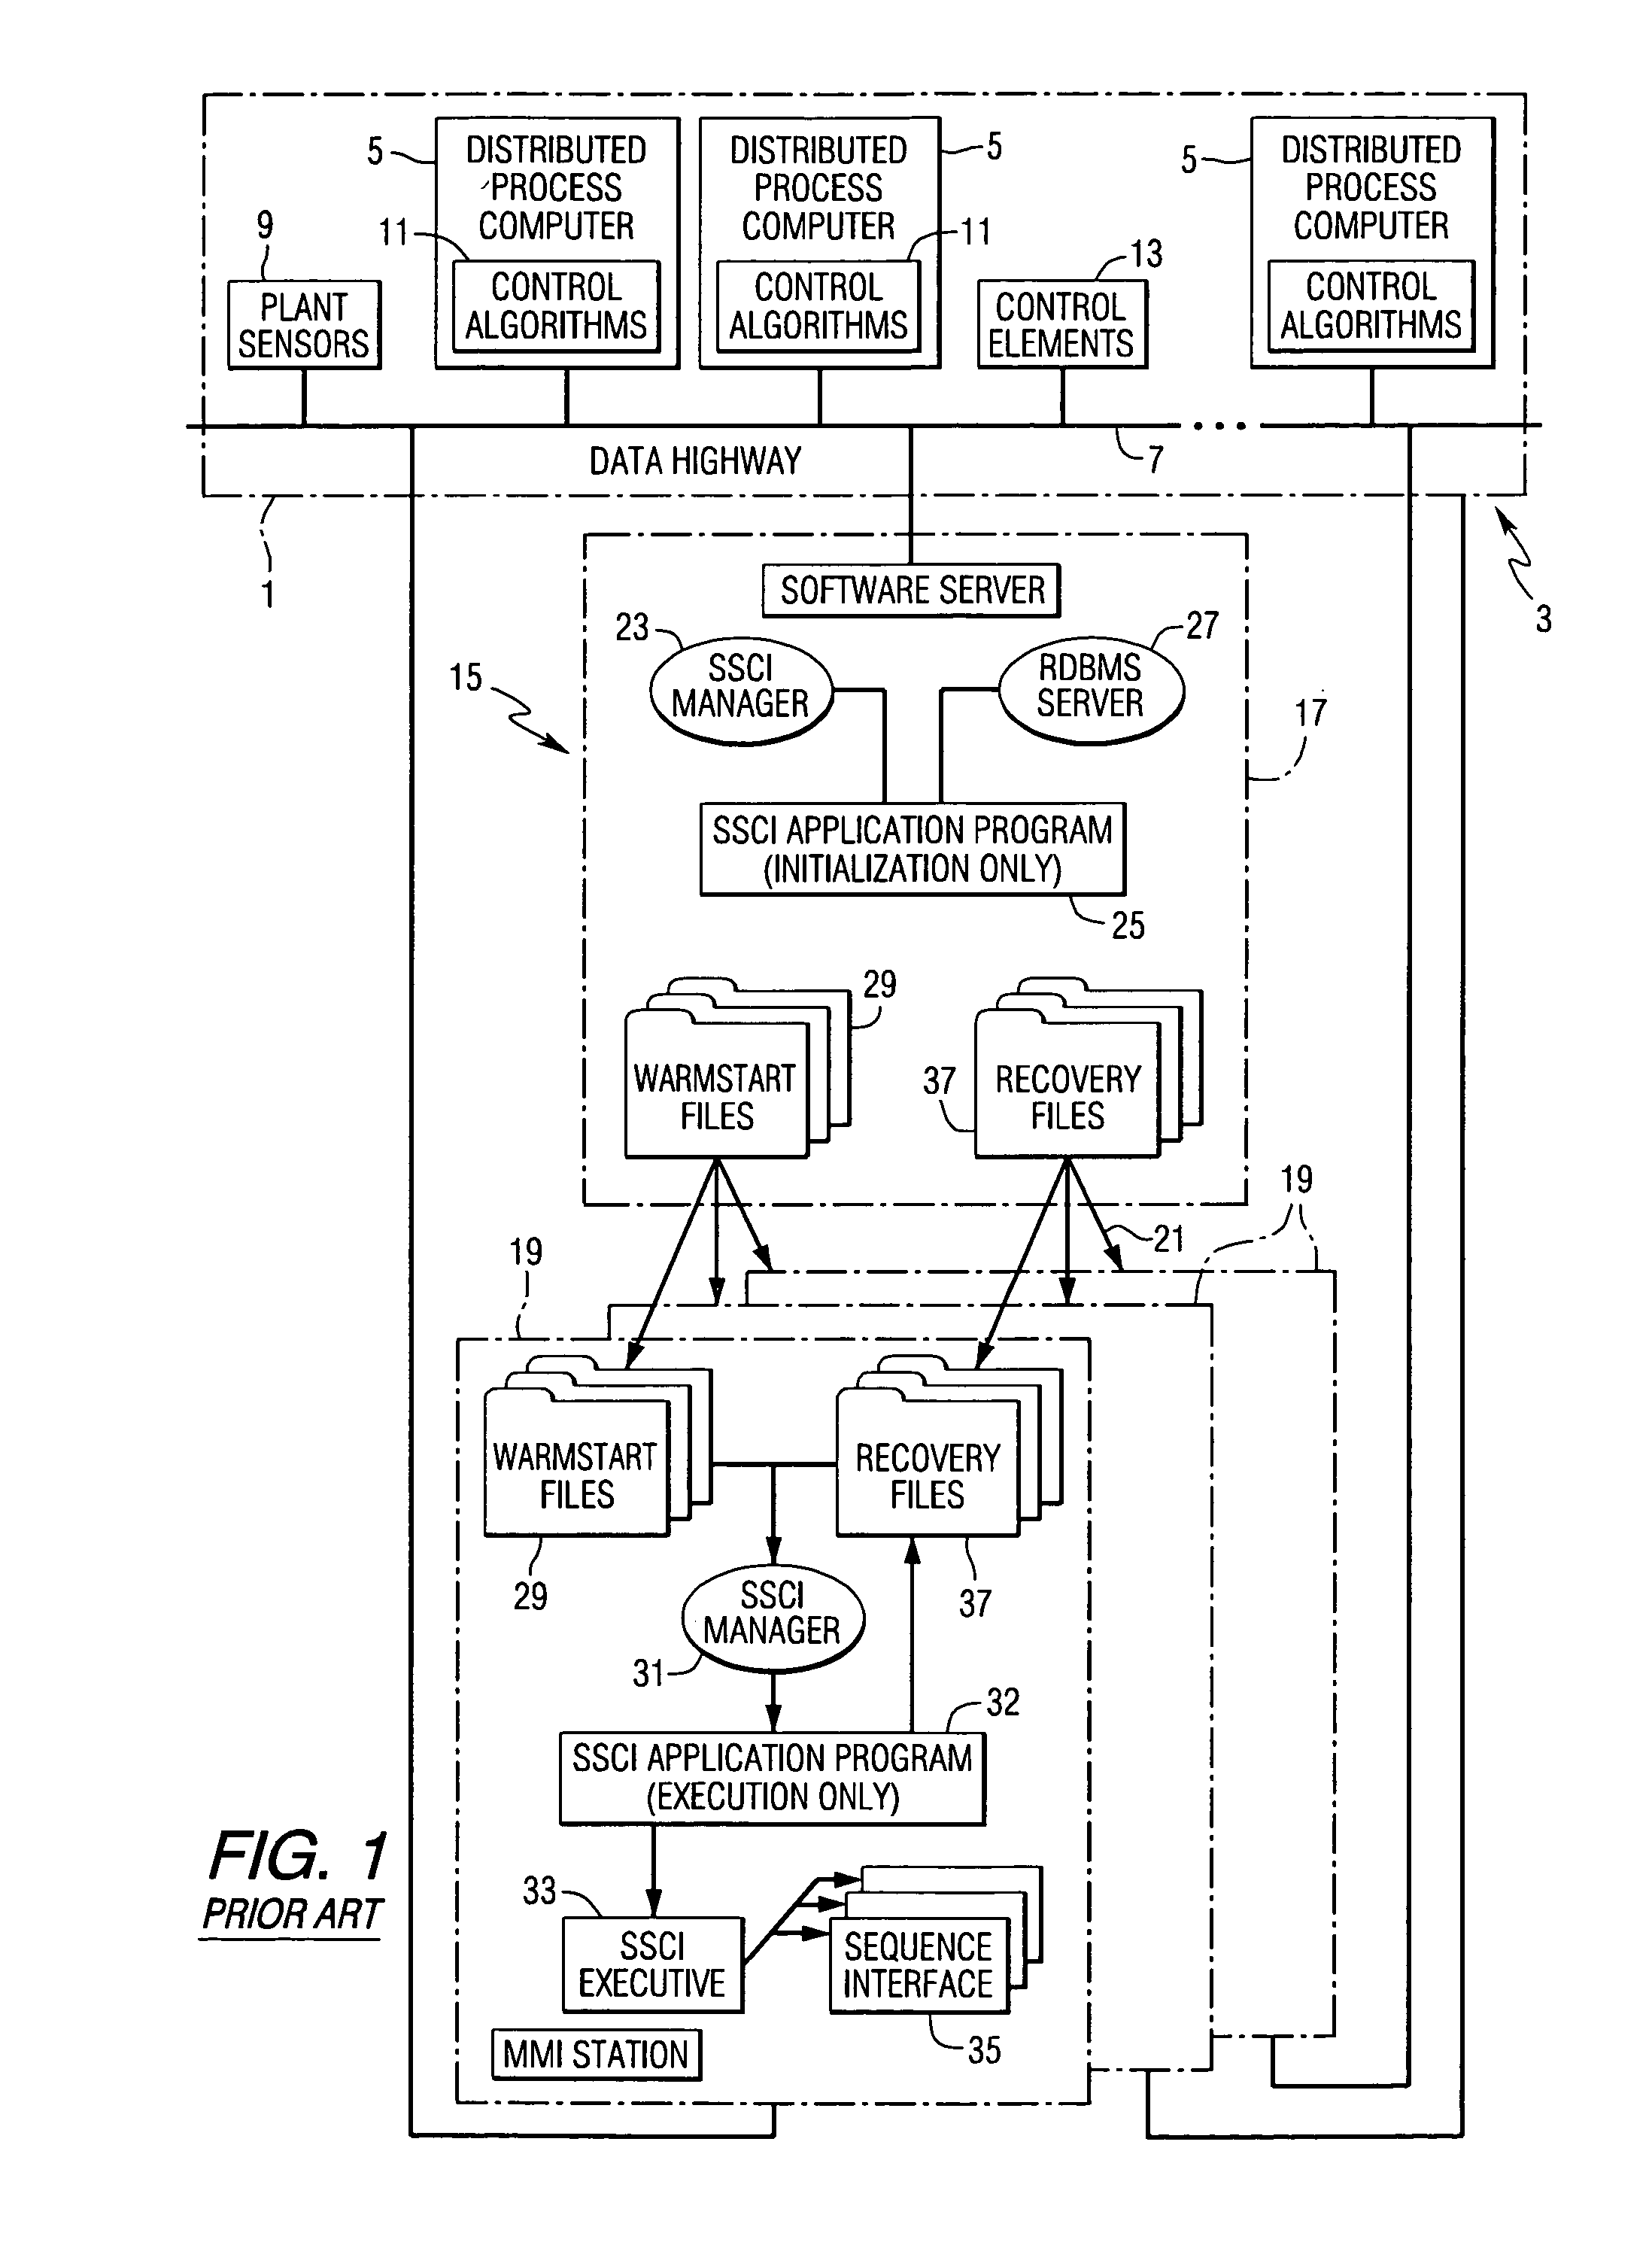 Control system display for monitoring a complex process